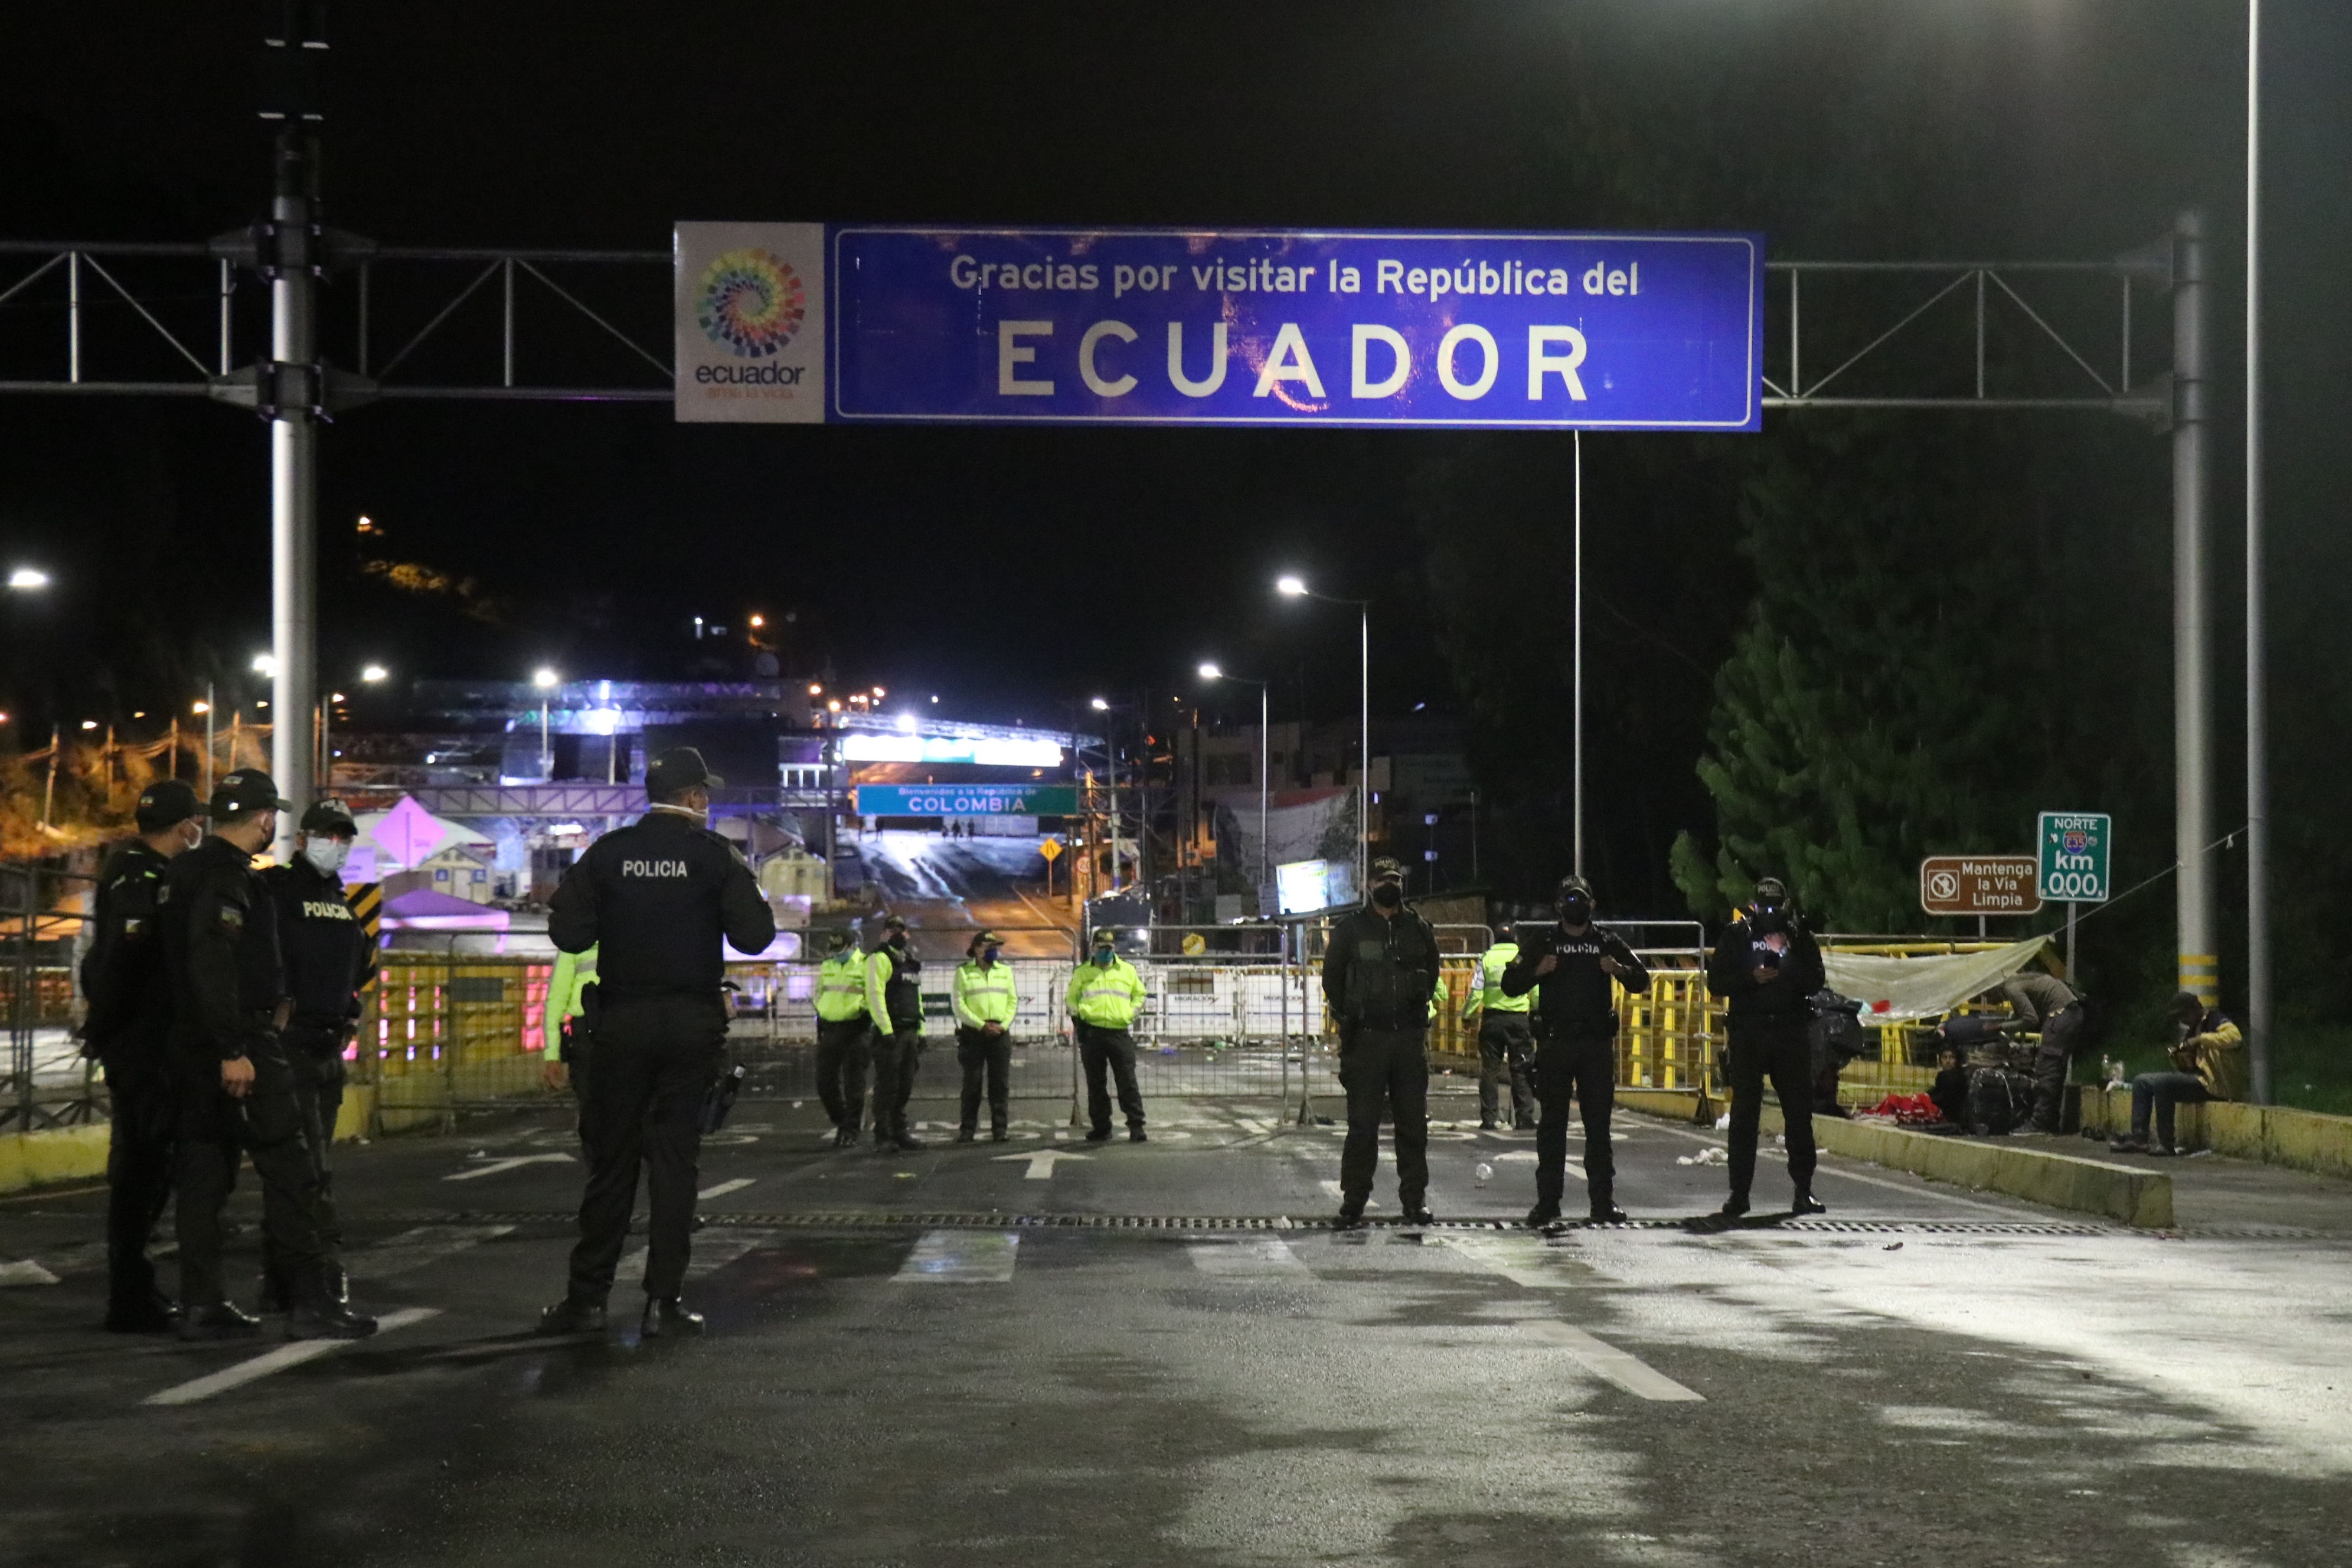 German Cáceres, the main suspect in the murder of María Belen Bernal, leaves Ecuador and crosses the Rumichaga bridge on the country's northern border (EFE / Xavier Montalvo)